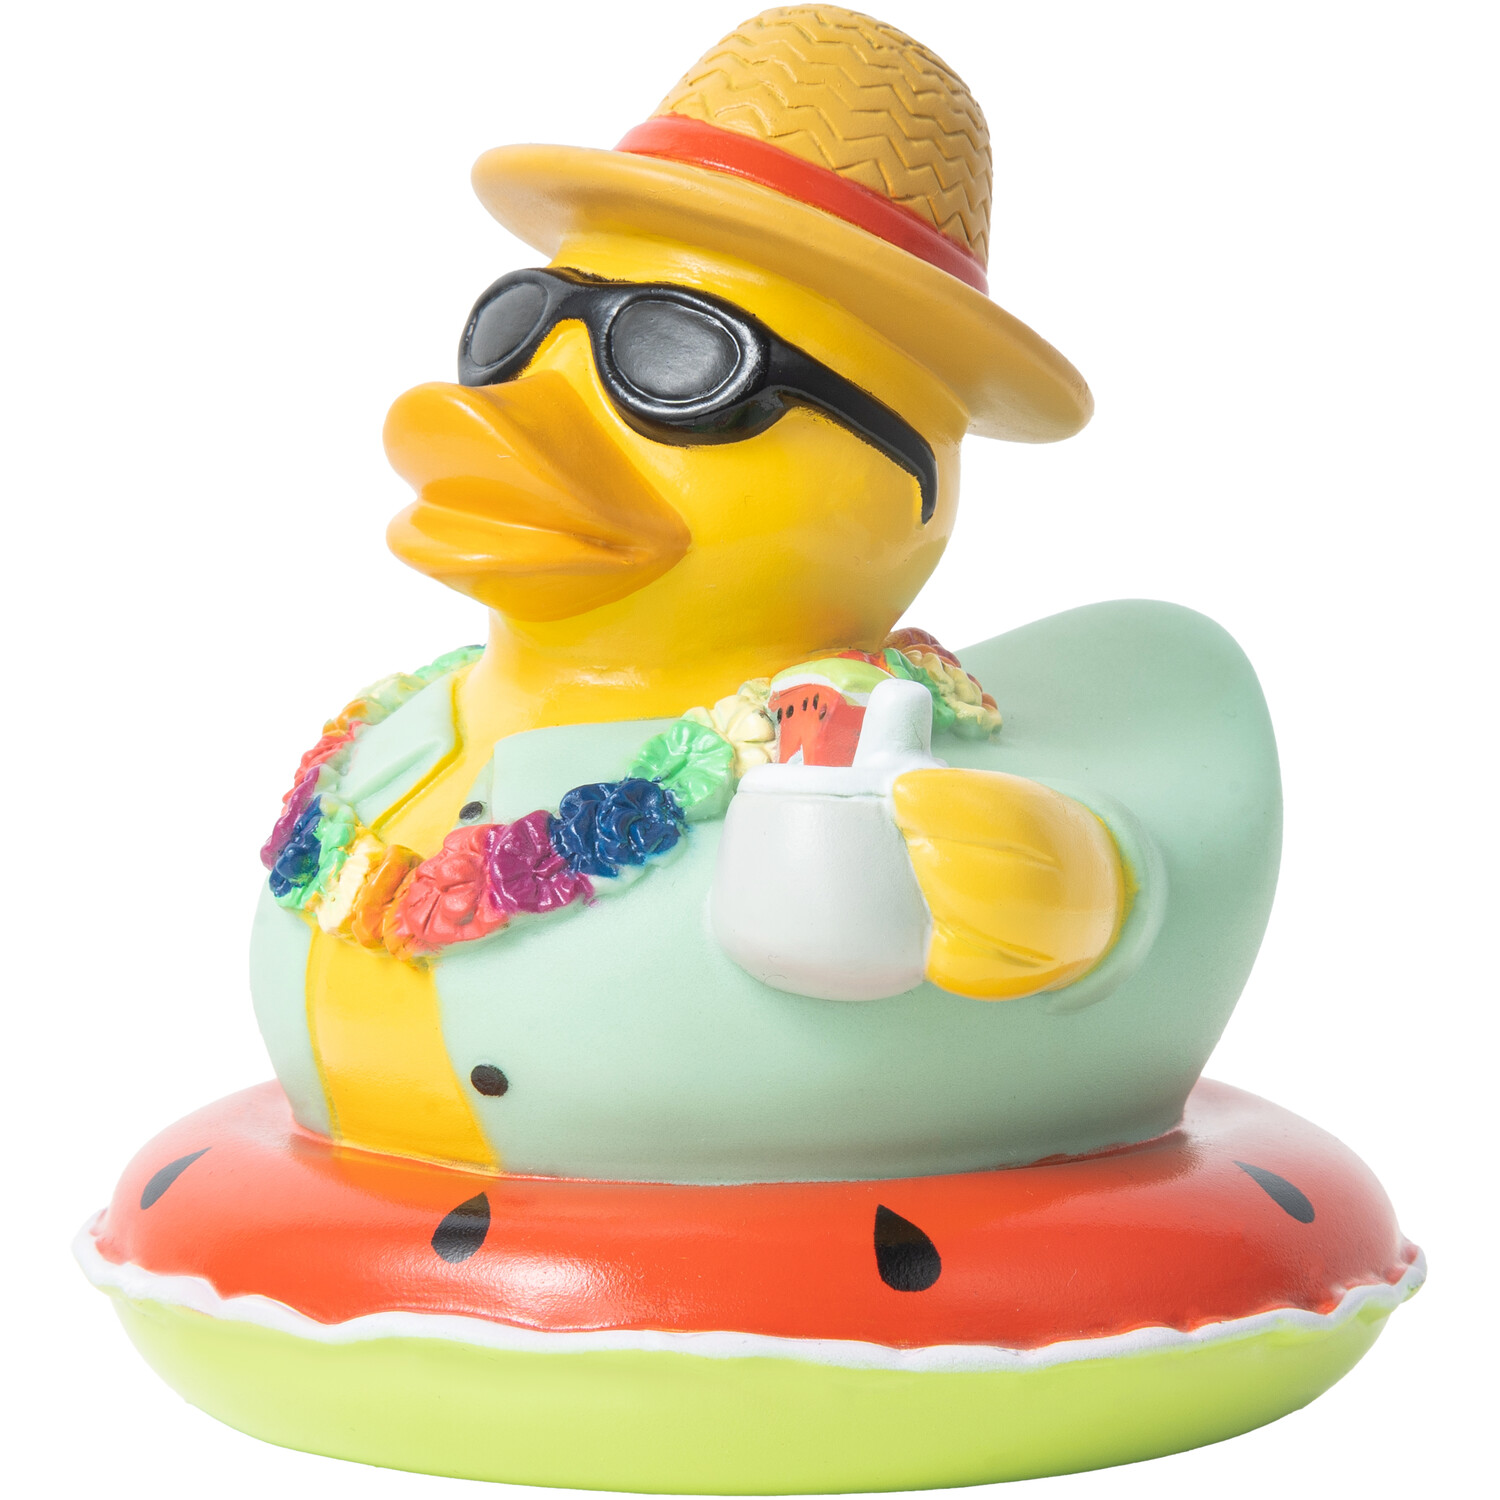 Holiday Rubber Duck Image 2